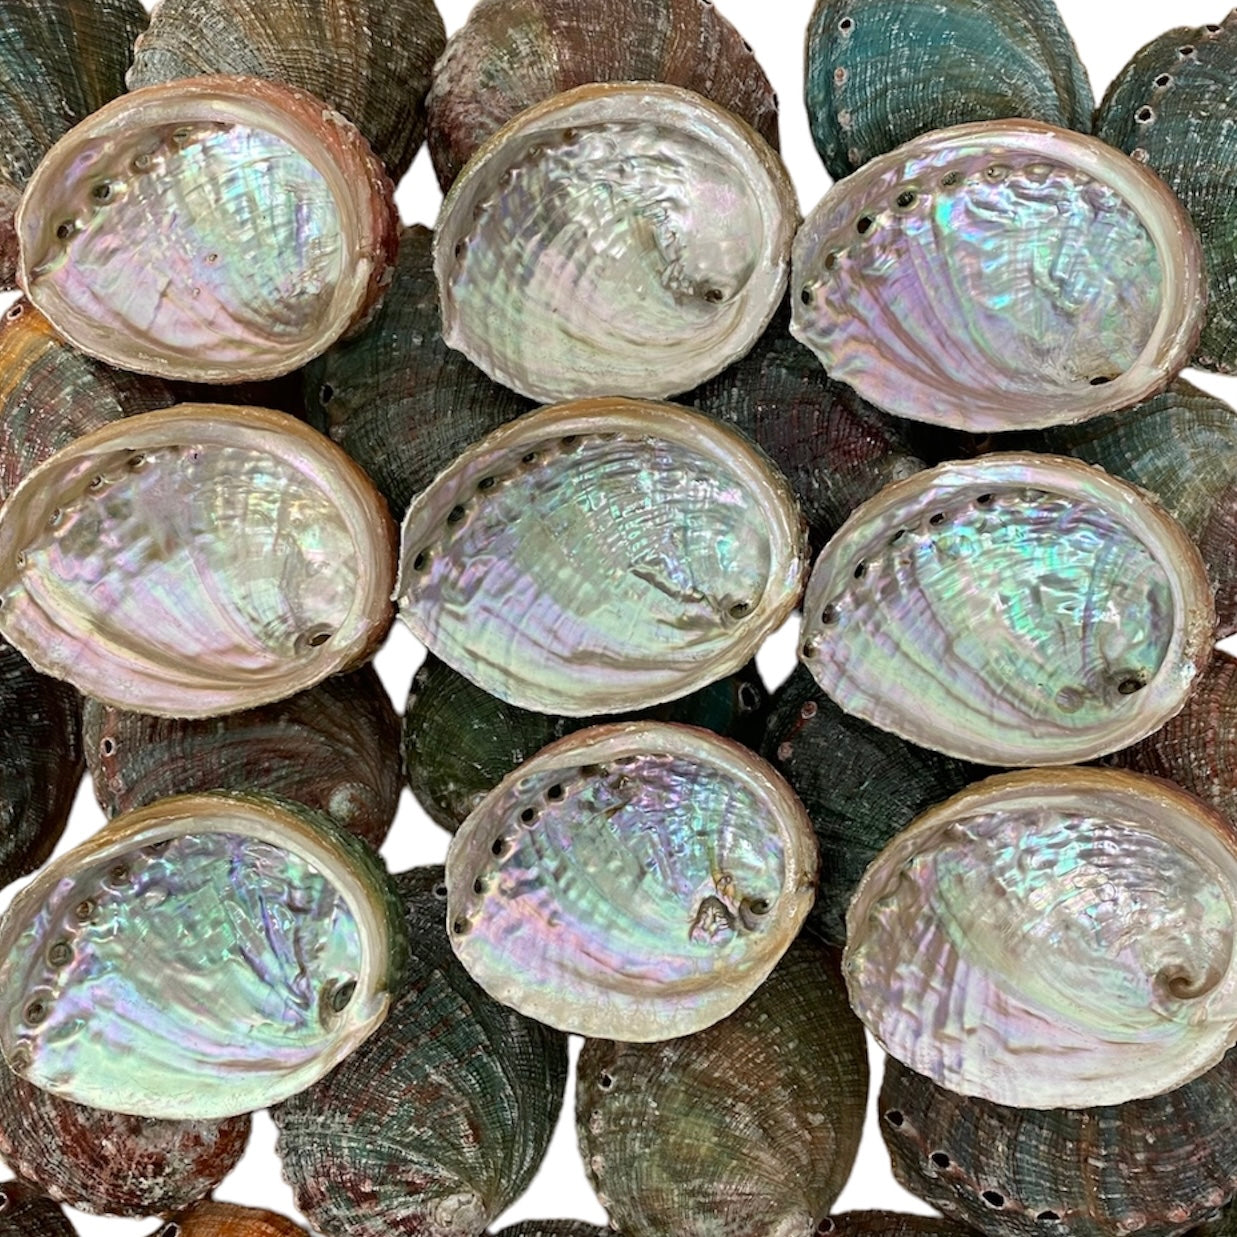 NessaStores 50 Abalone Shells 2.5 to 3.5 Inches | Beautiful All Natural Smudge Bowl - Perfect for Smudge Sticks, Incense Sticks and a Sage Smudge Kit. #JC-020